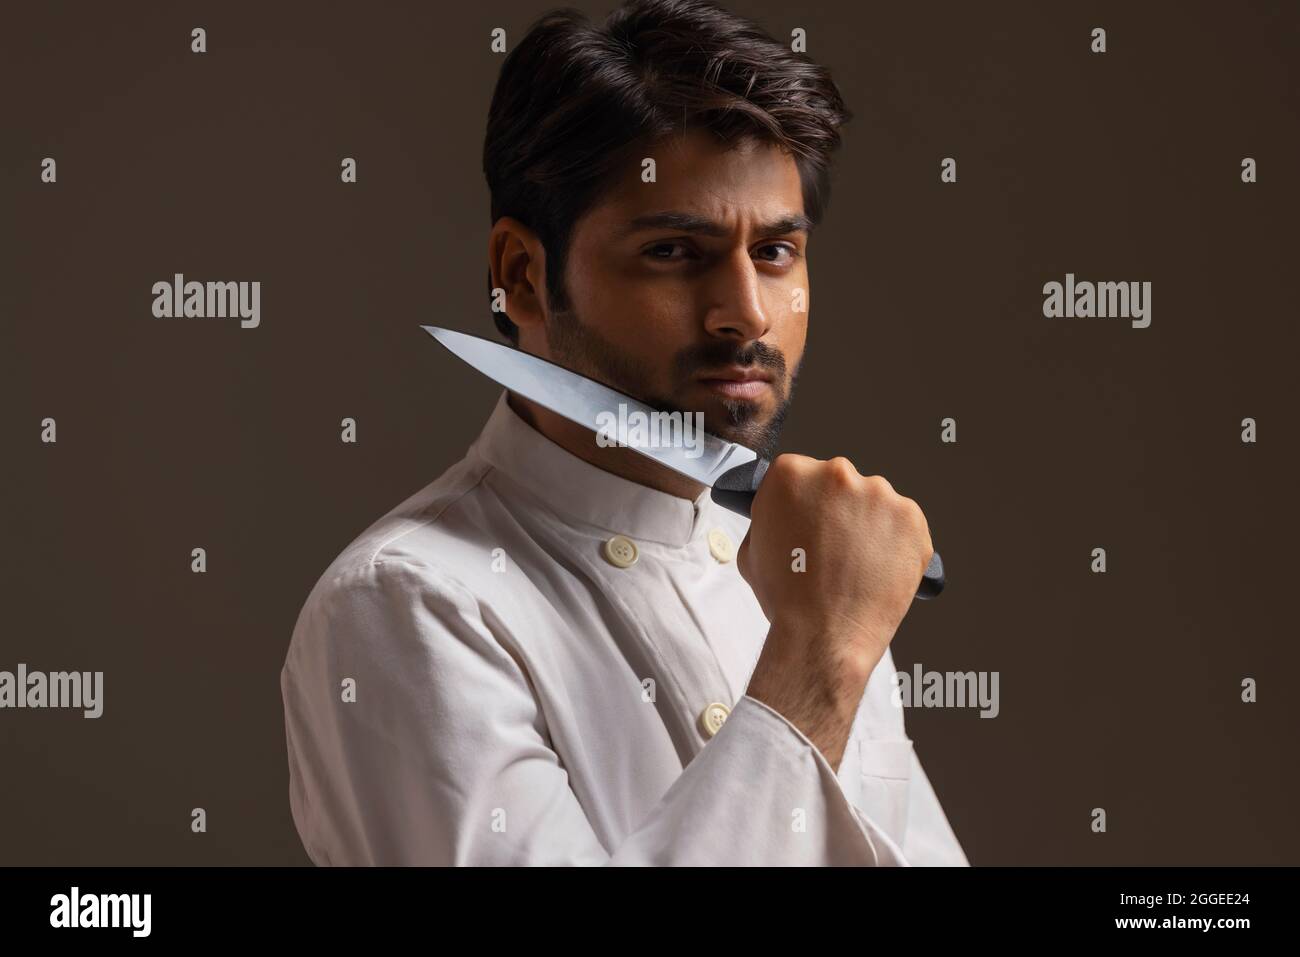 A CHEF POSING IN FRONT OF CAMERA IN SERIOUSNESS WITH KNIFE IN HAND Stock Photo